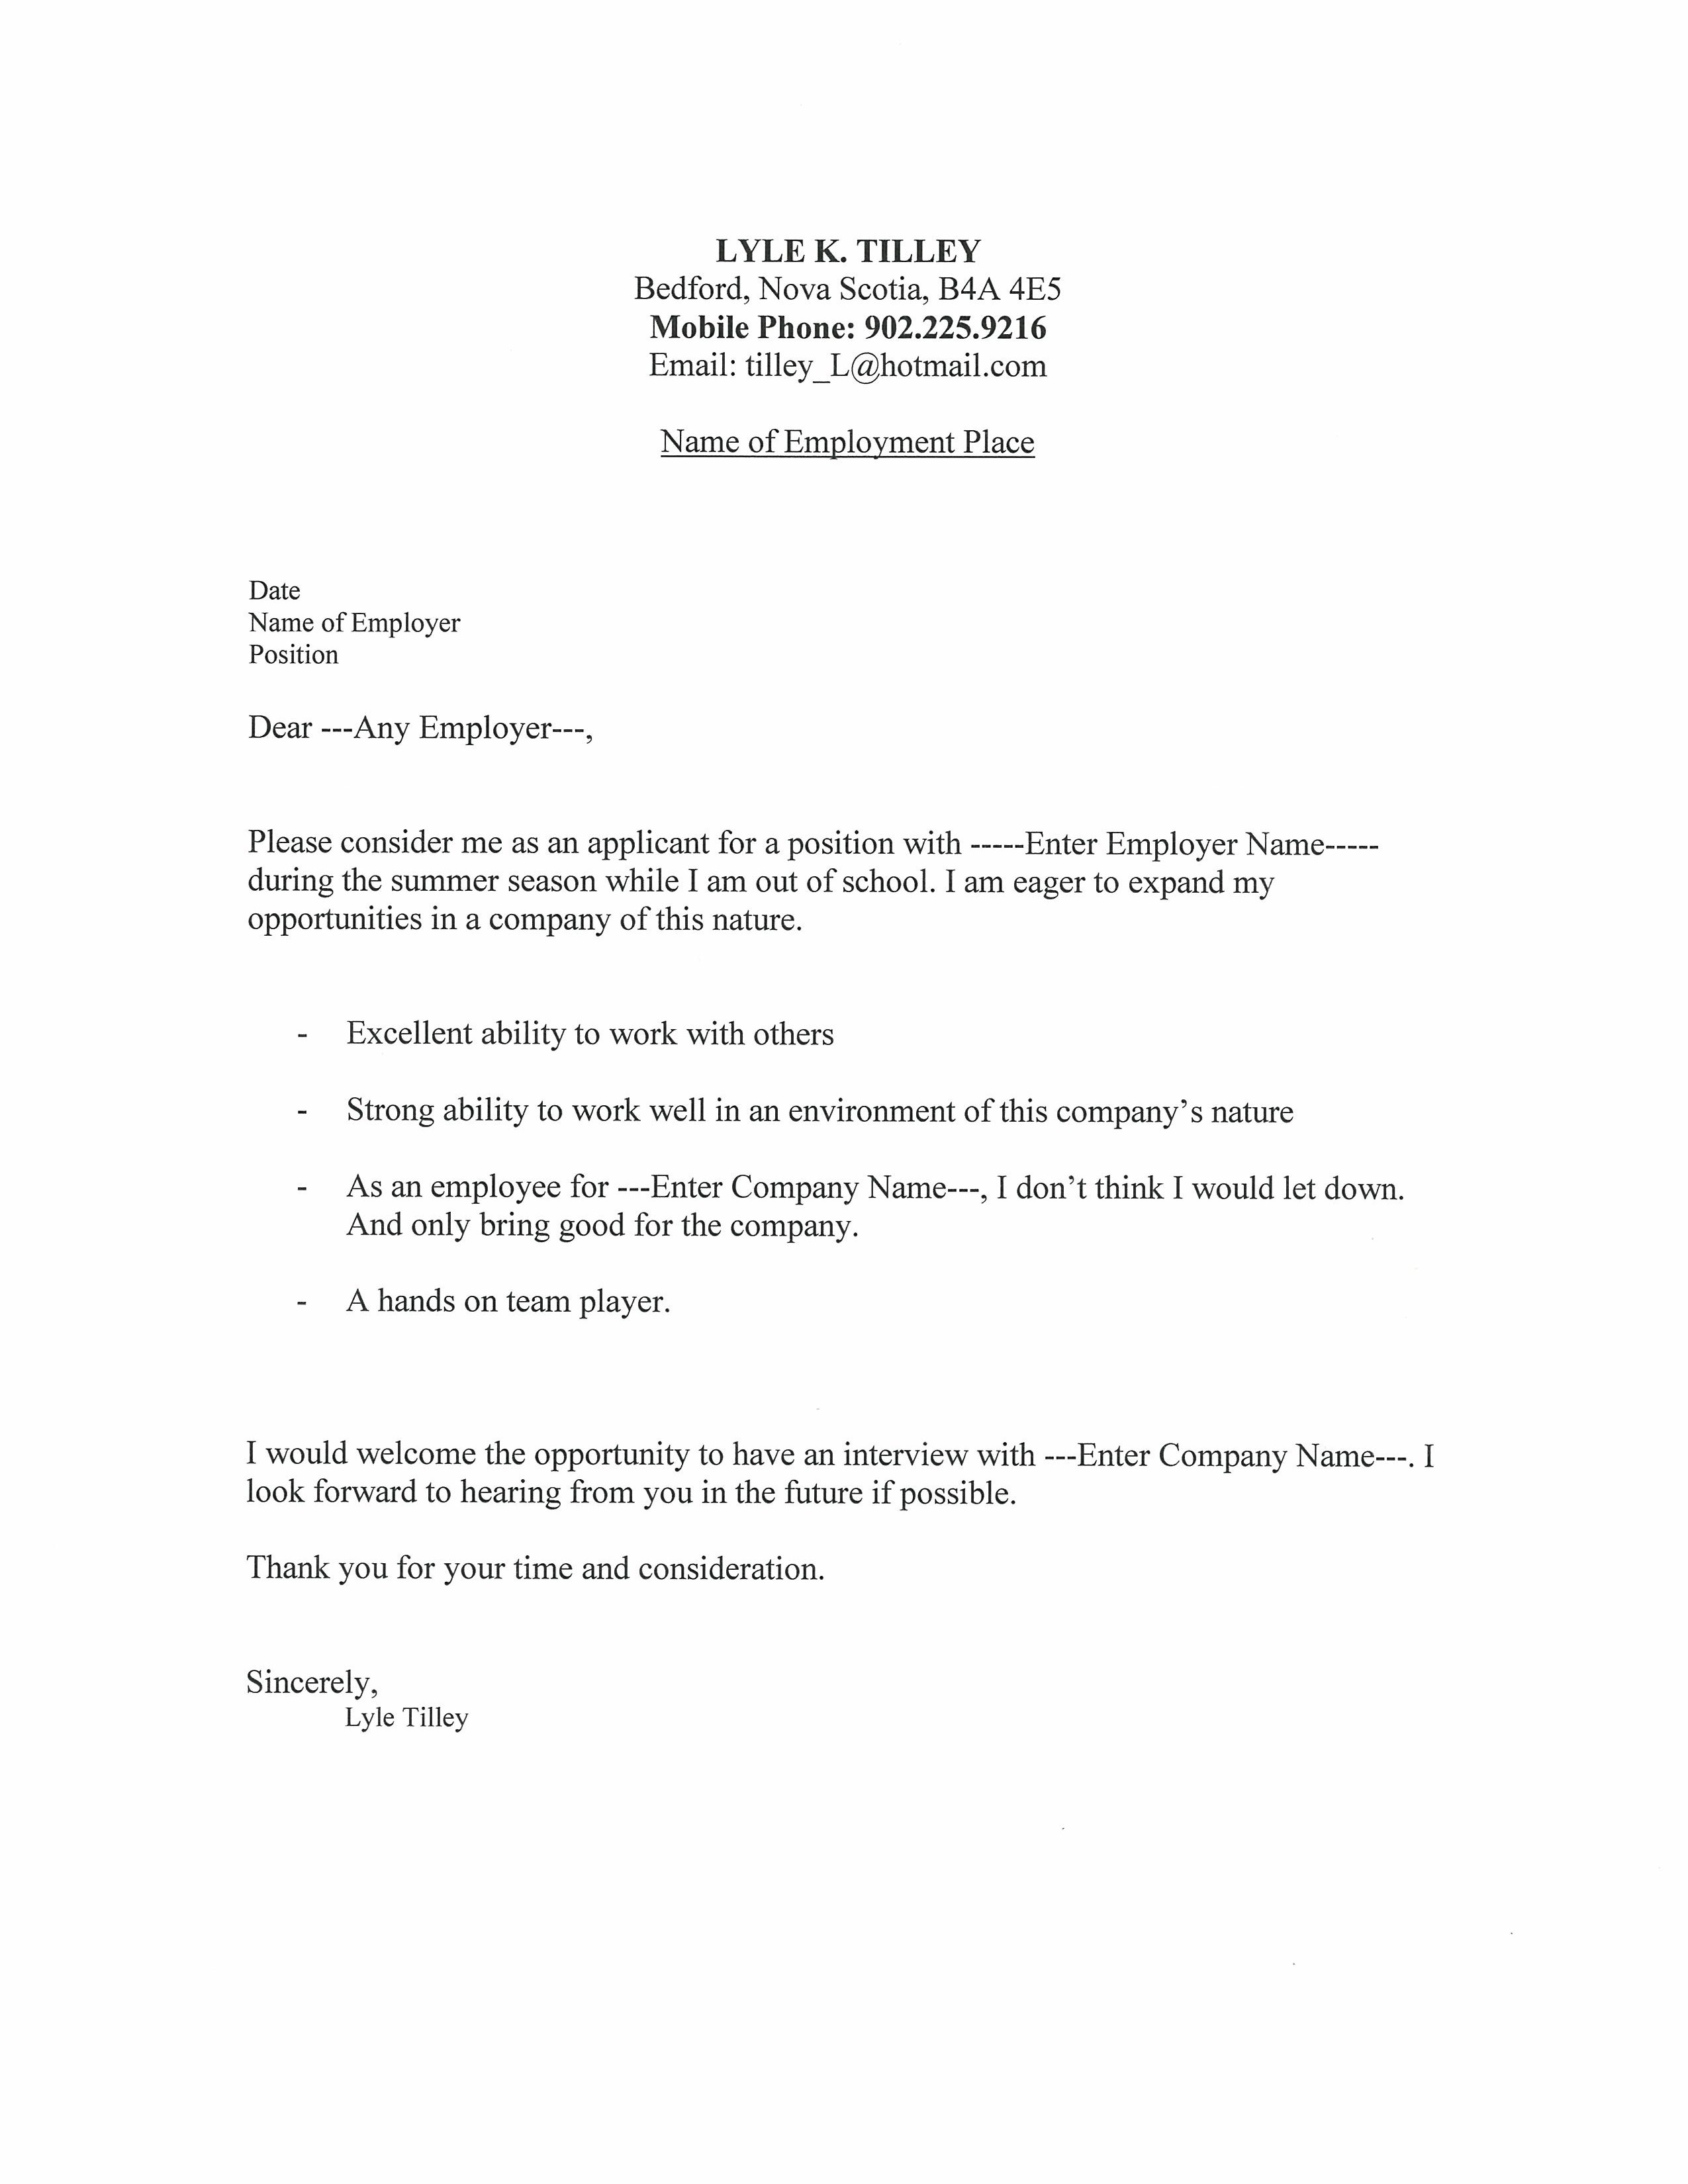 Cover letters for resumes